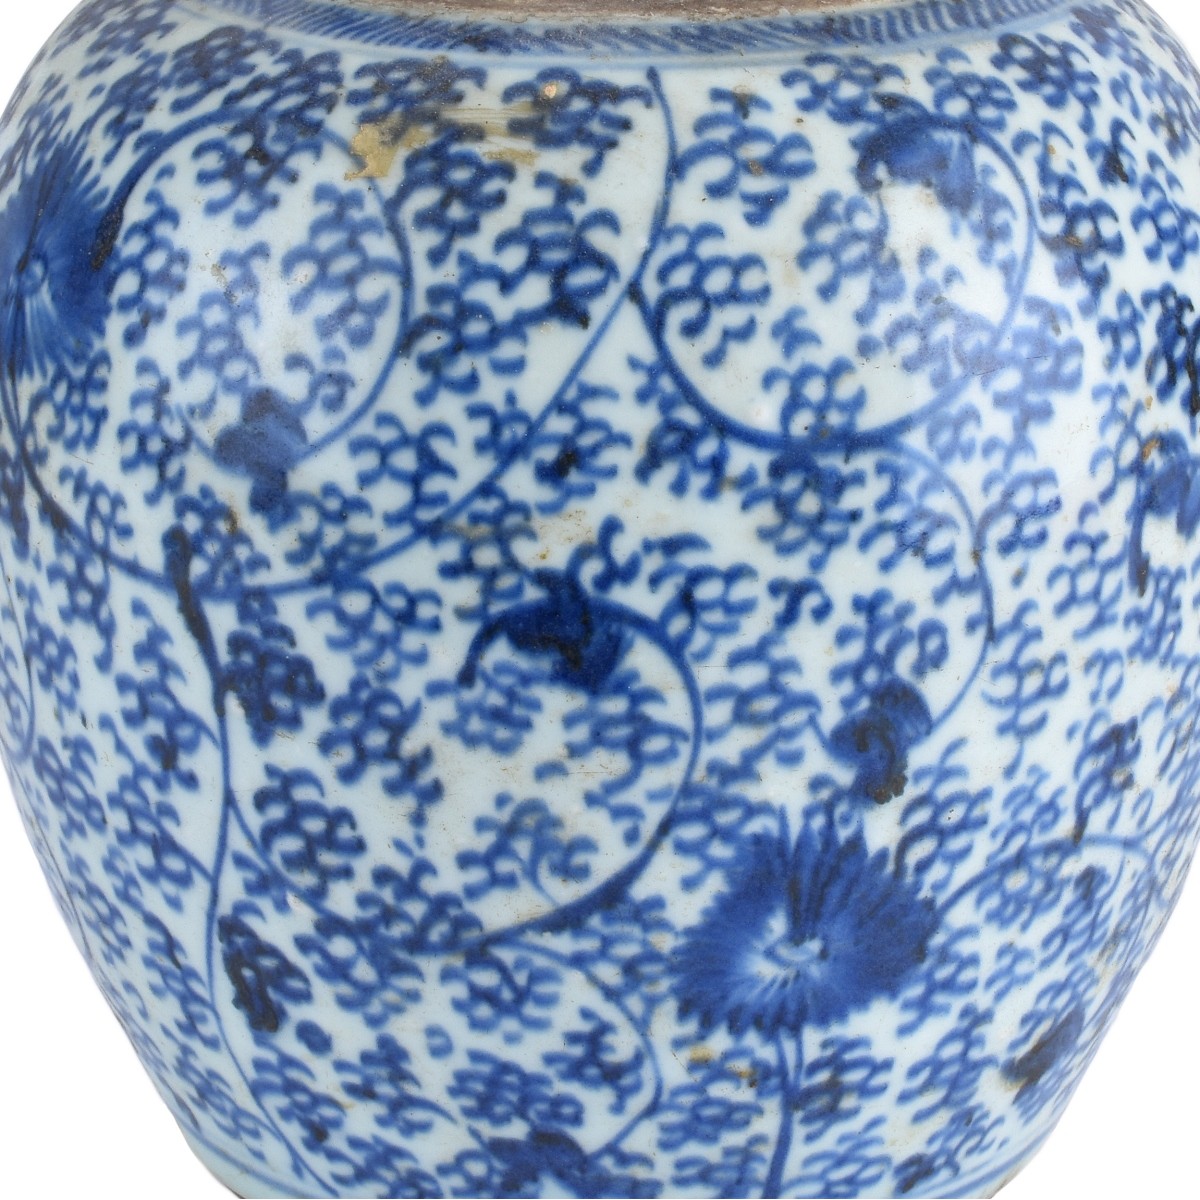 Antique Chinese Blue and White Porcelain Jar